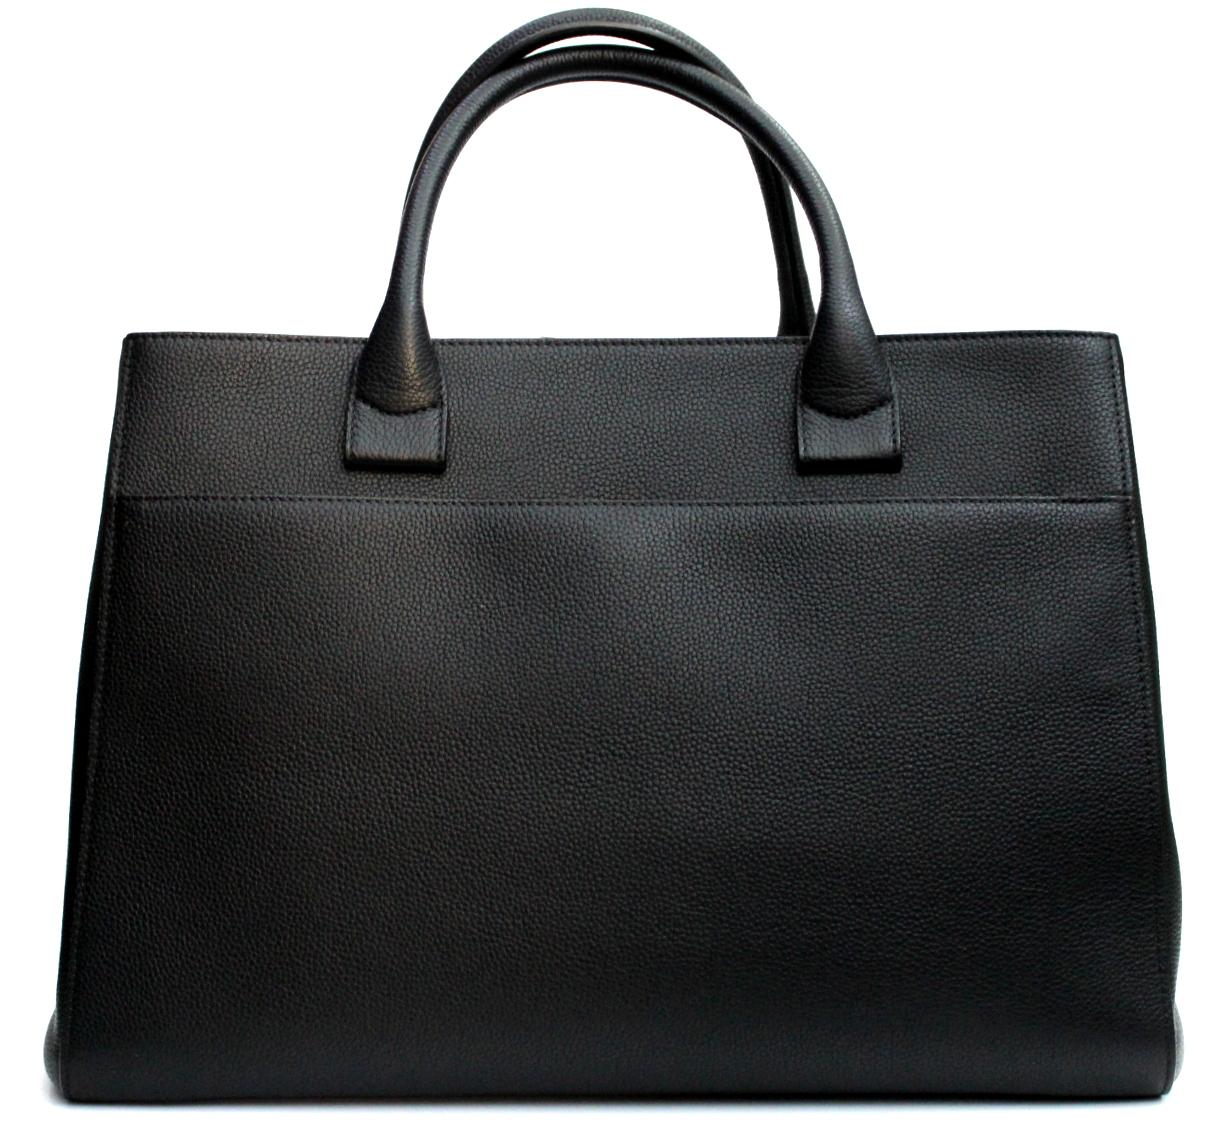 This elegant and refined Neo Executive shoulder bag in black Caviar Chanel is made for the elegance of every day. This beautiful leather tote has an elegant design with two handles and a removable shoulder strap. The bag has an elegant front pocket